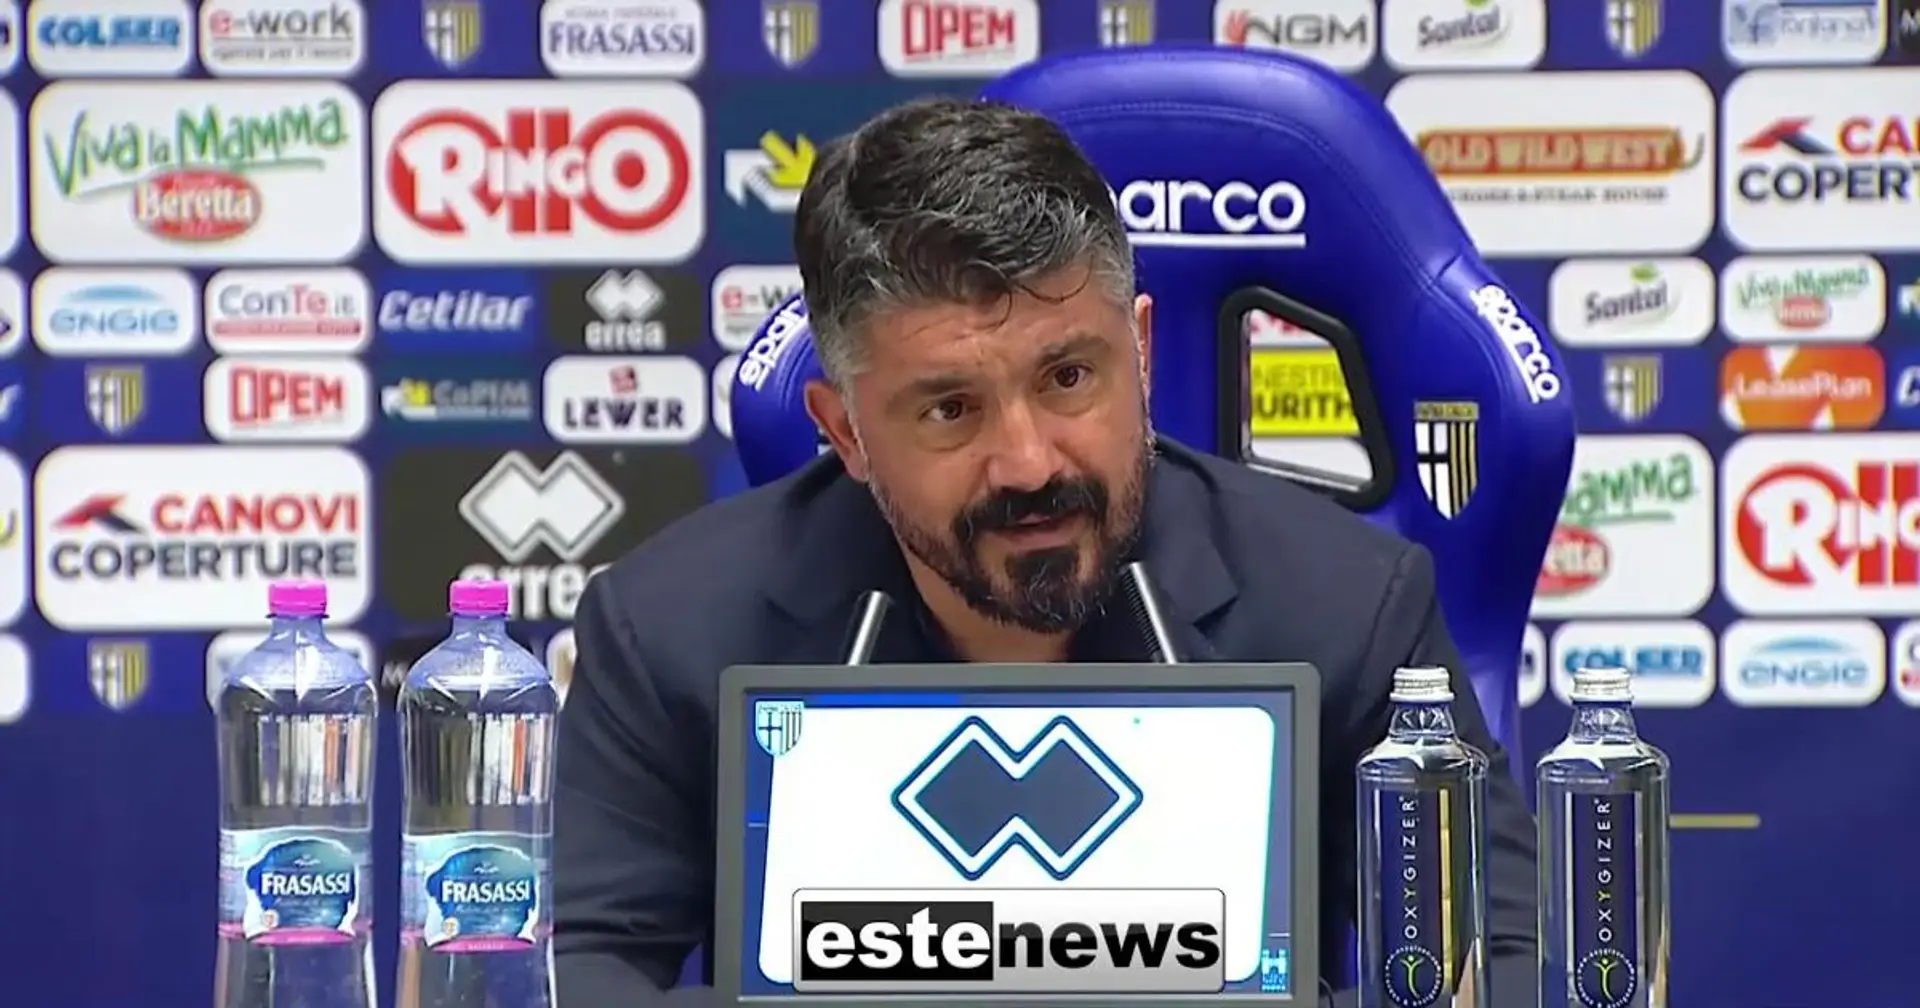 'If we continue like this, we won't even tickle Barca': Napoli's coach Gattuso